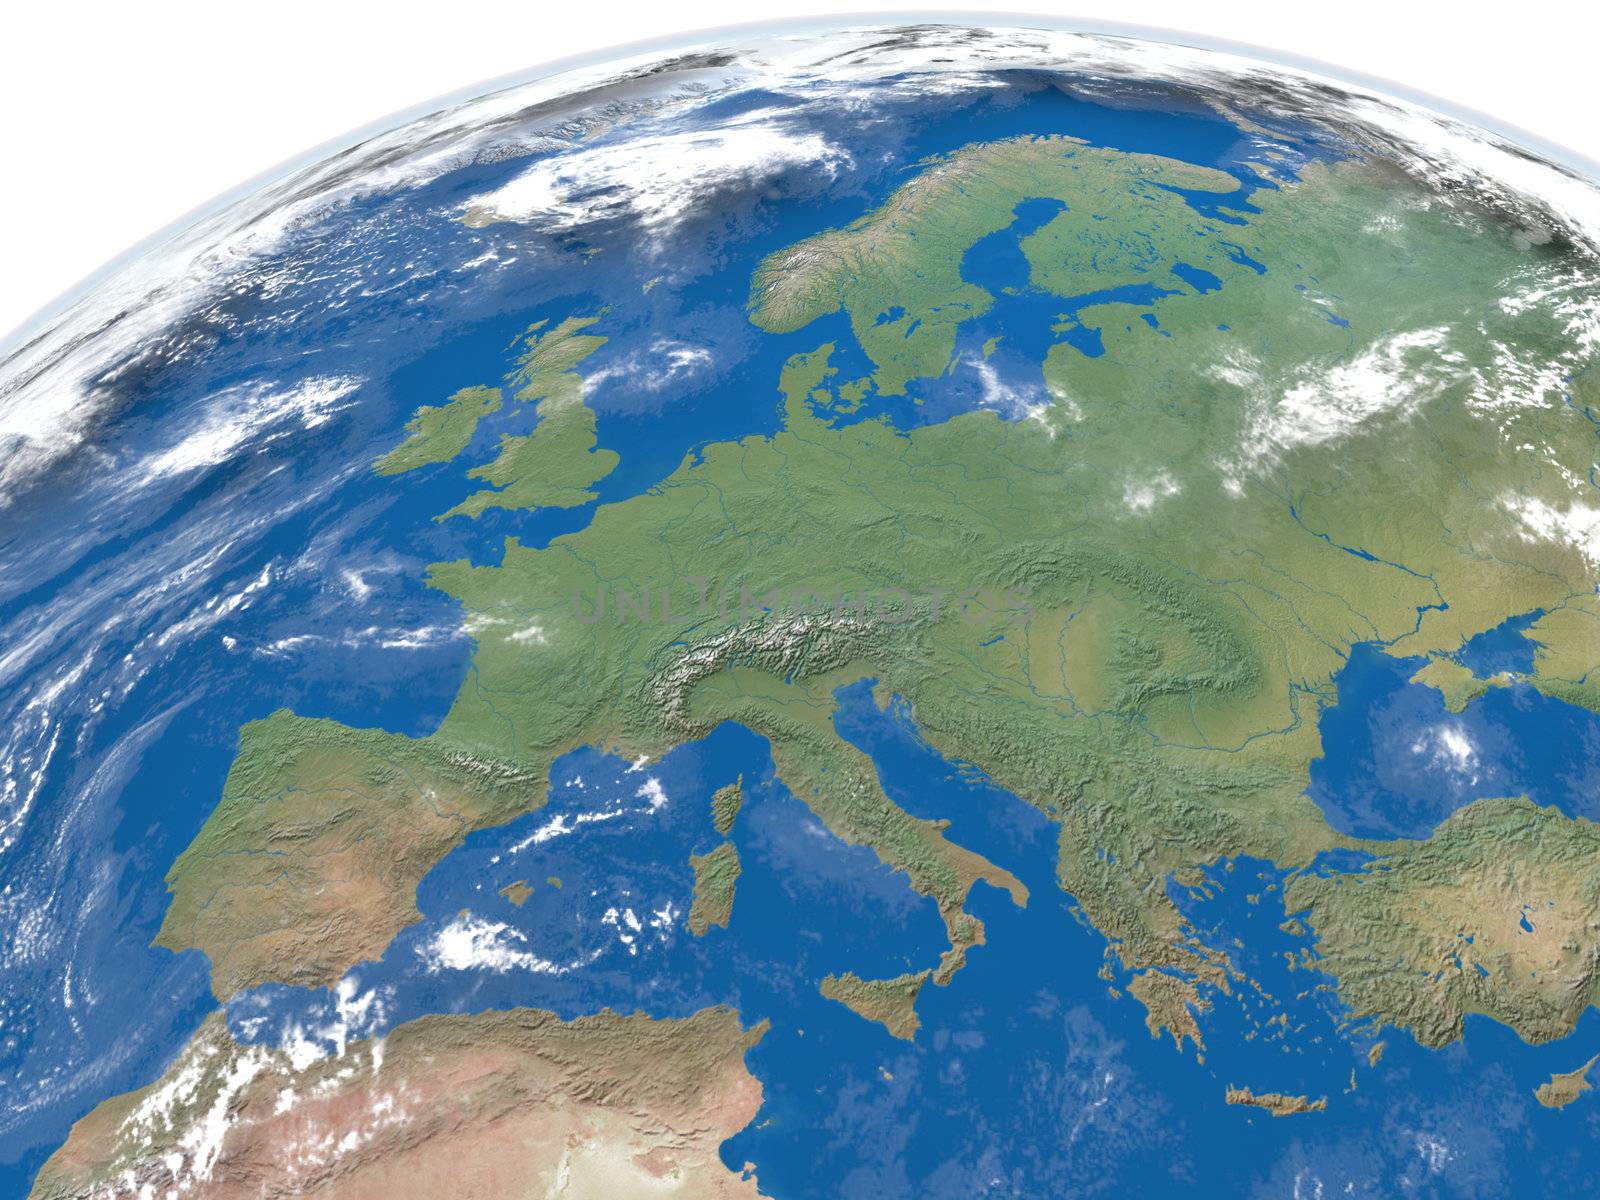 Detailed illustration of Europe from space with clouds and atmosphere. Elements of this image furnished by NASA